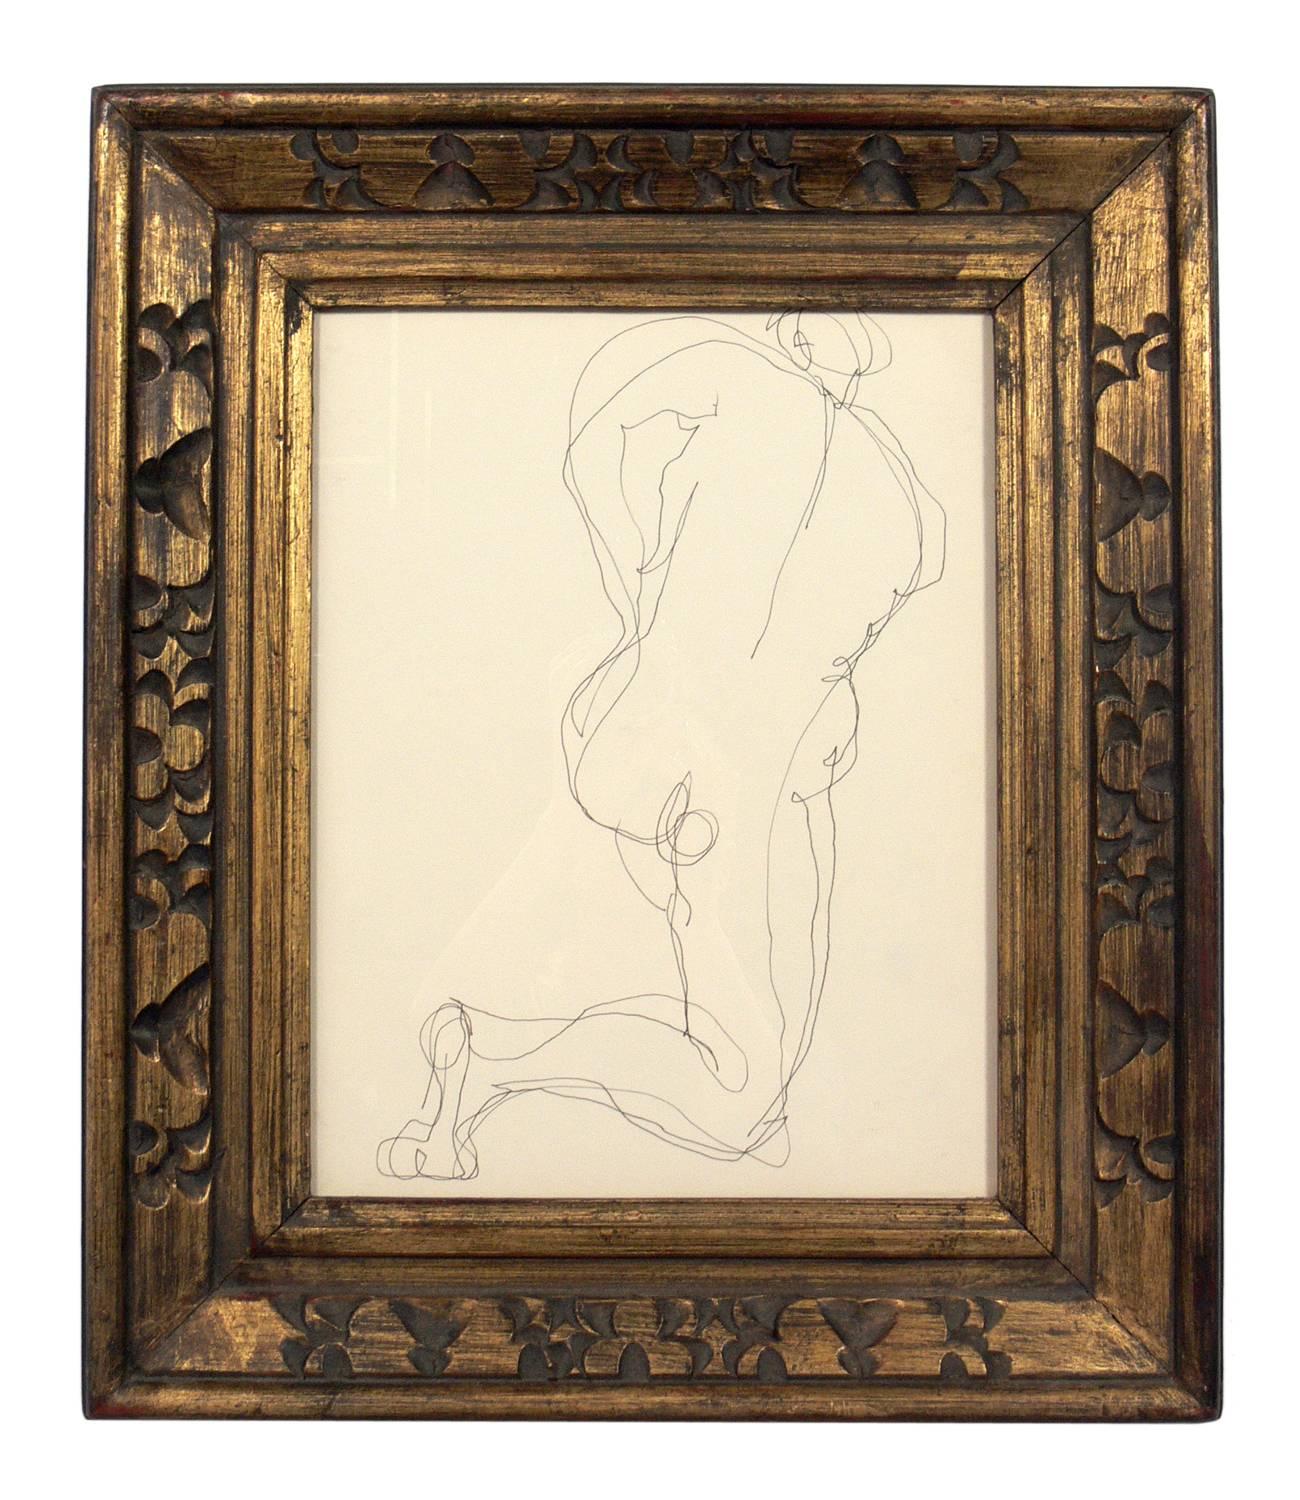 Selection of figural line drawings or gallery wall by Miriam Kubach, American, circa 1950s. They have been framed in vintage gilt frames. From left to right they measure 20